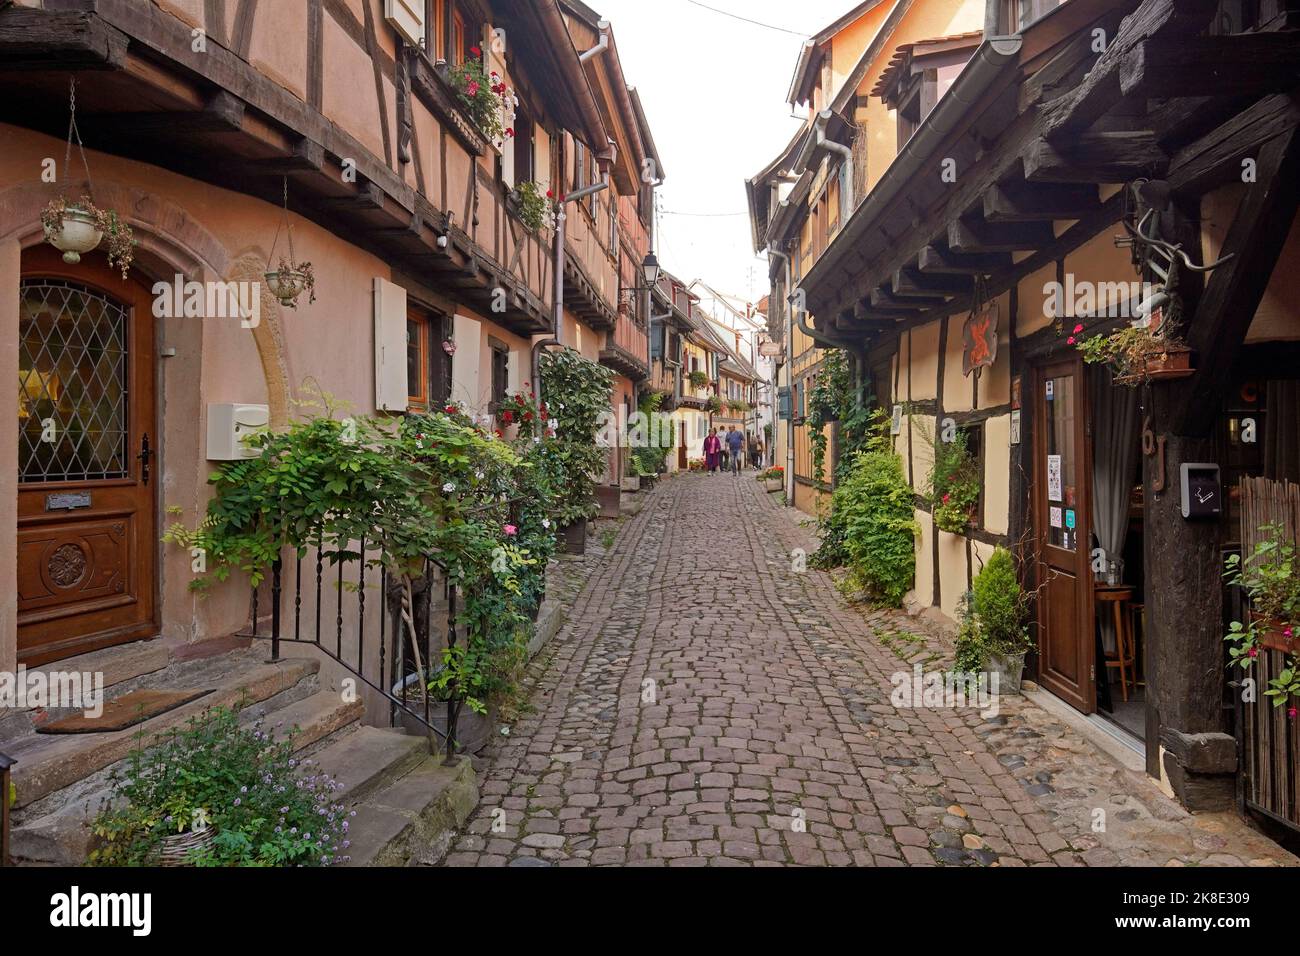 Colourful half-timbered houses in the historic old town of Eguisheim, Alsace, France Stock Photo